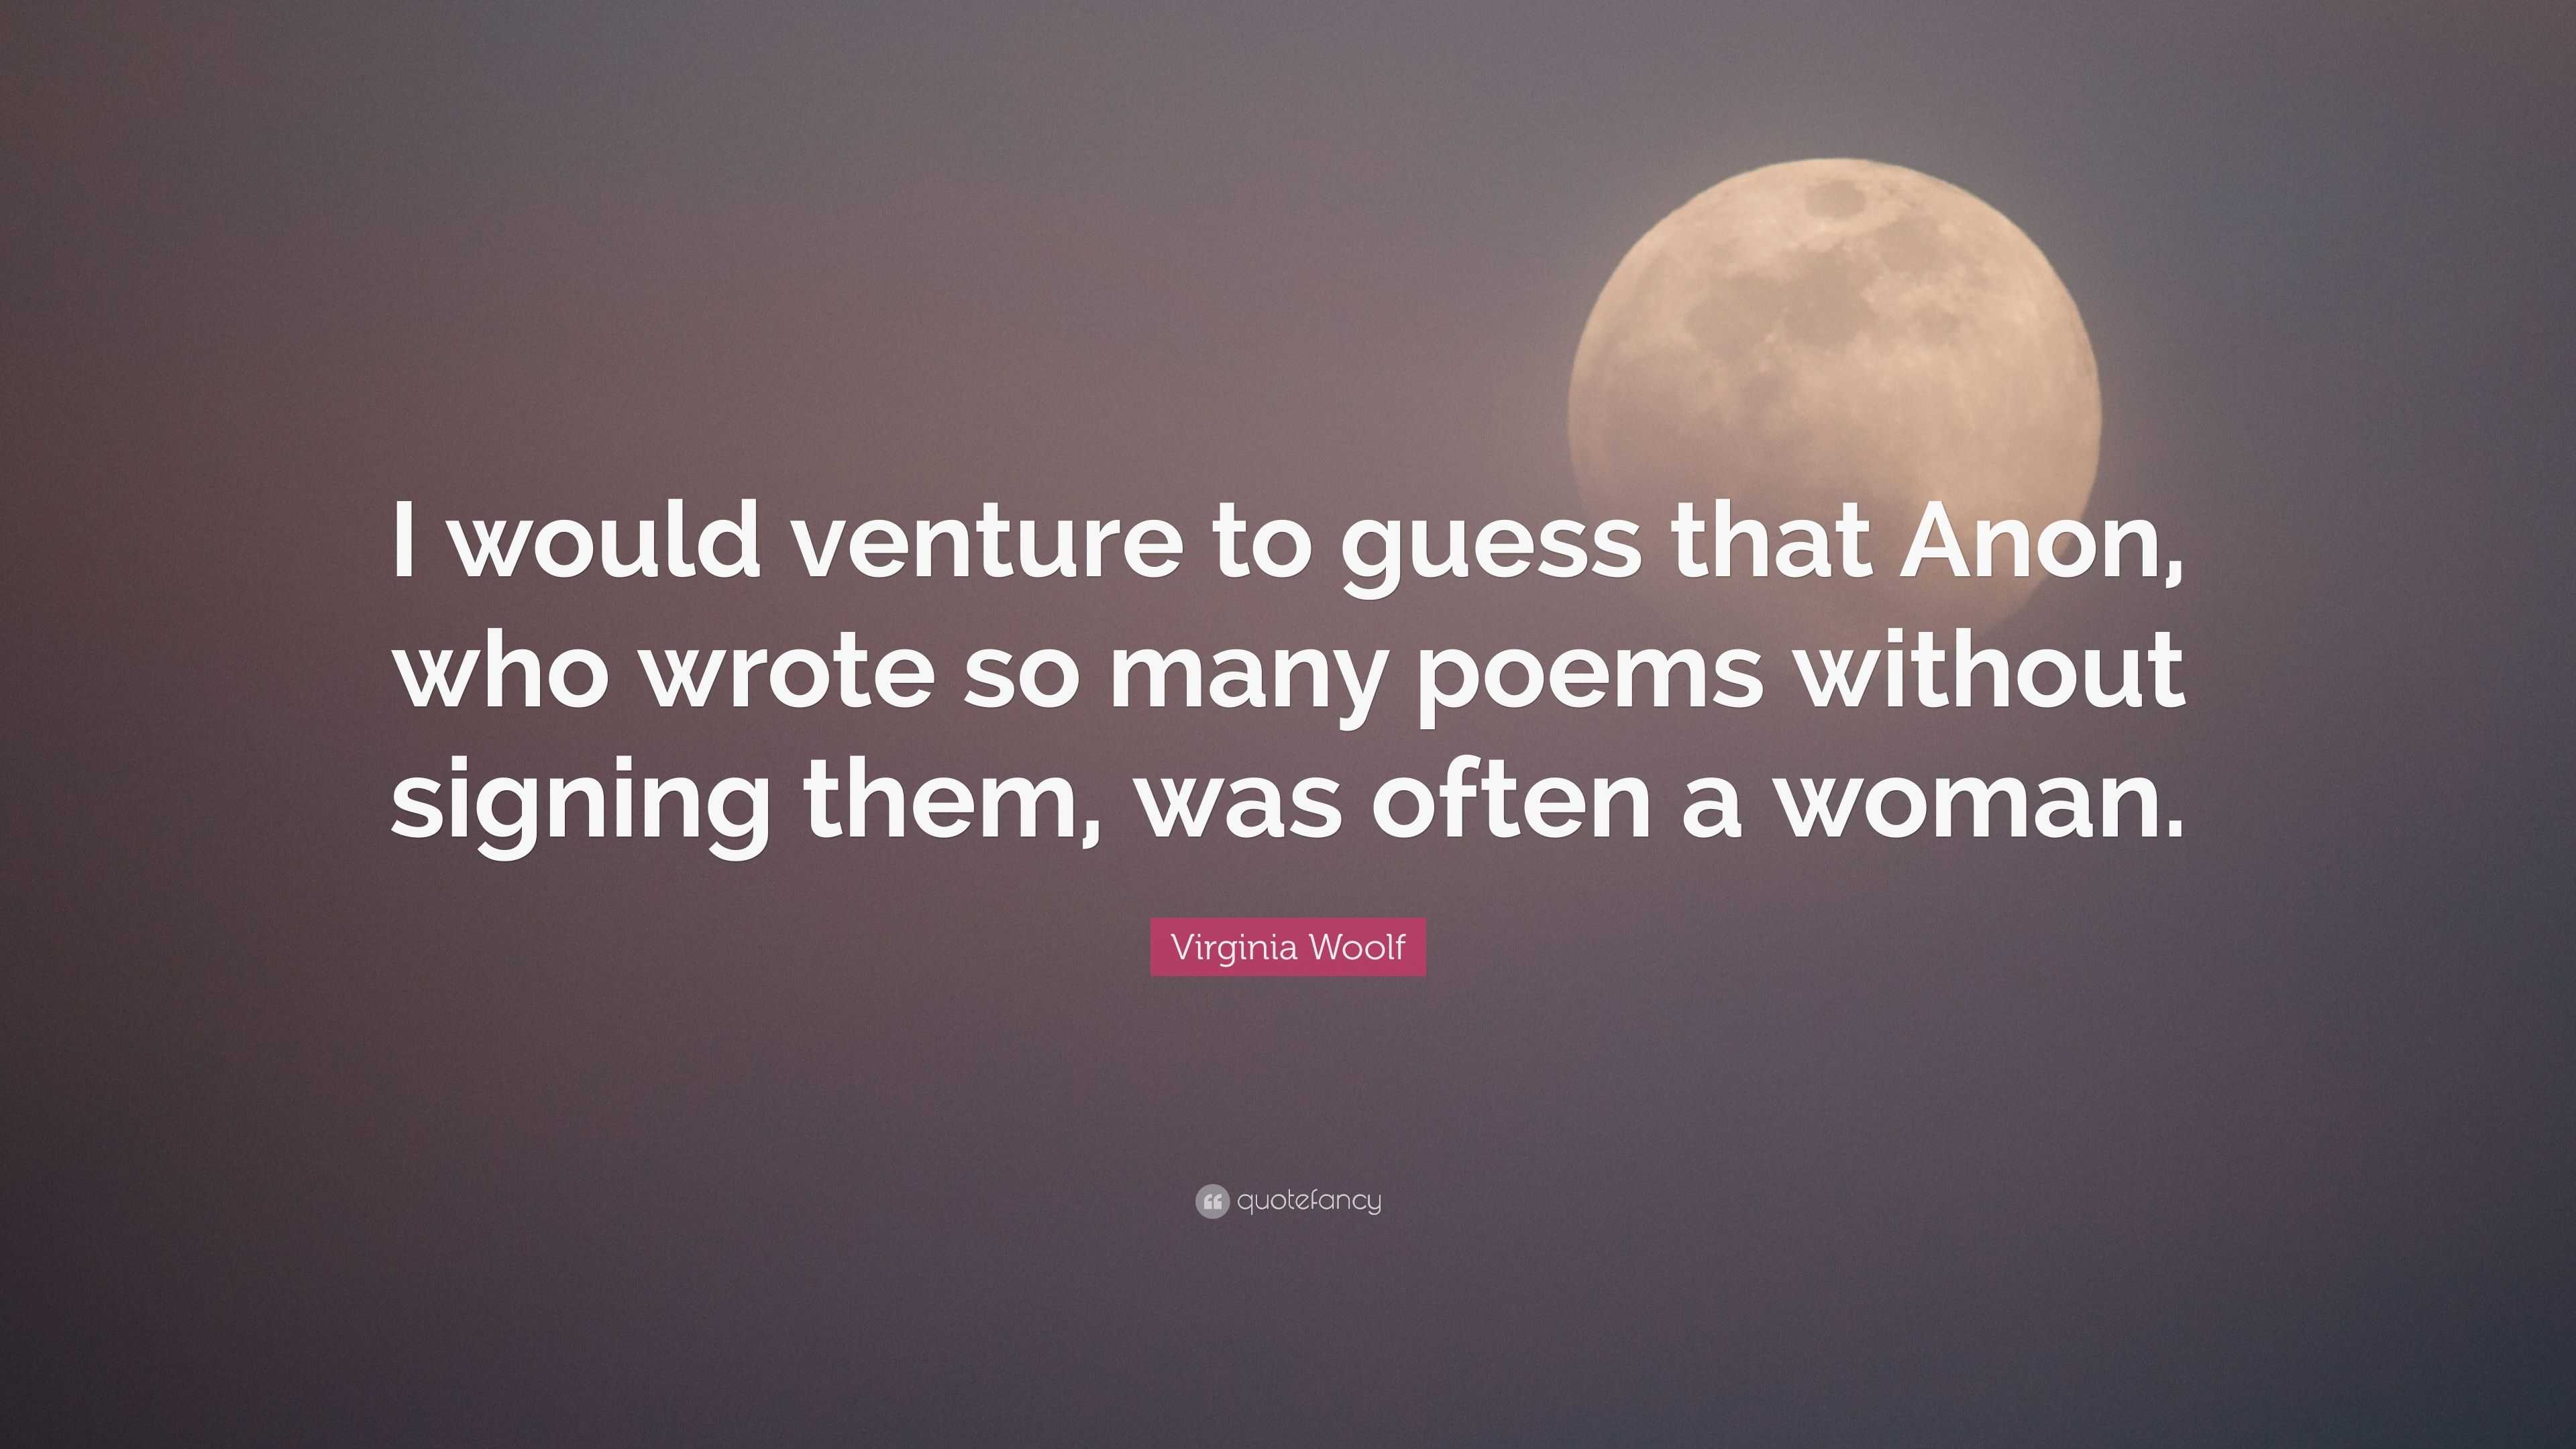 Virginia Woolf Quote: “I would venture to guess that Anon ...